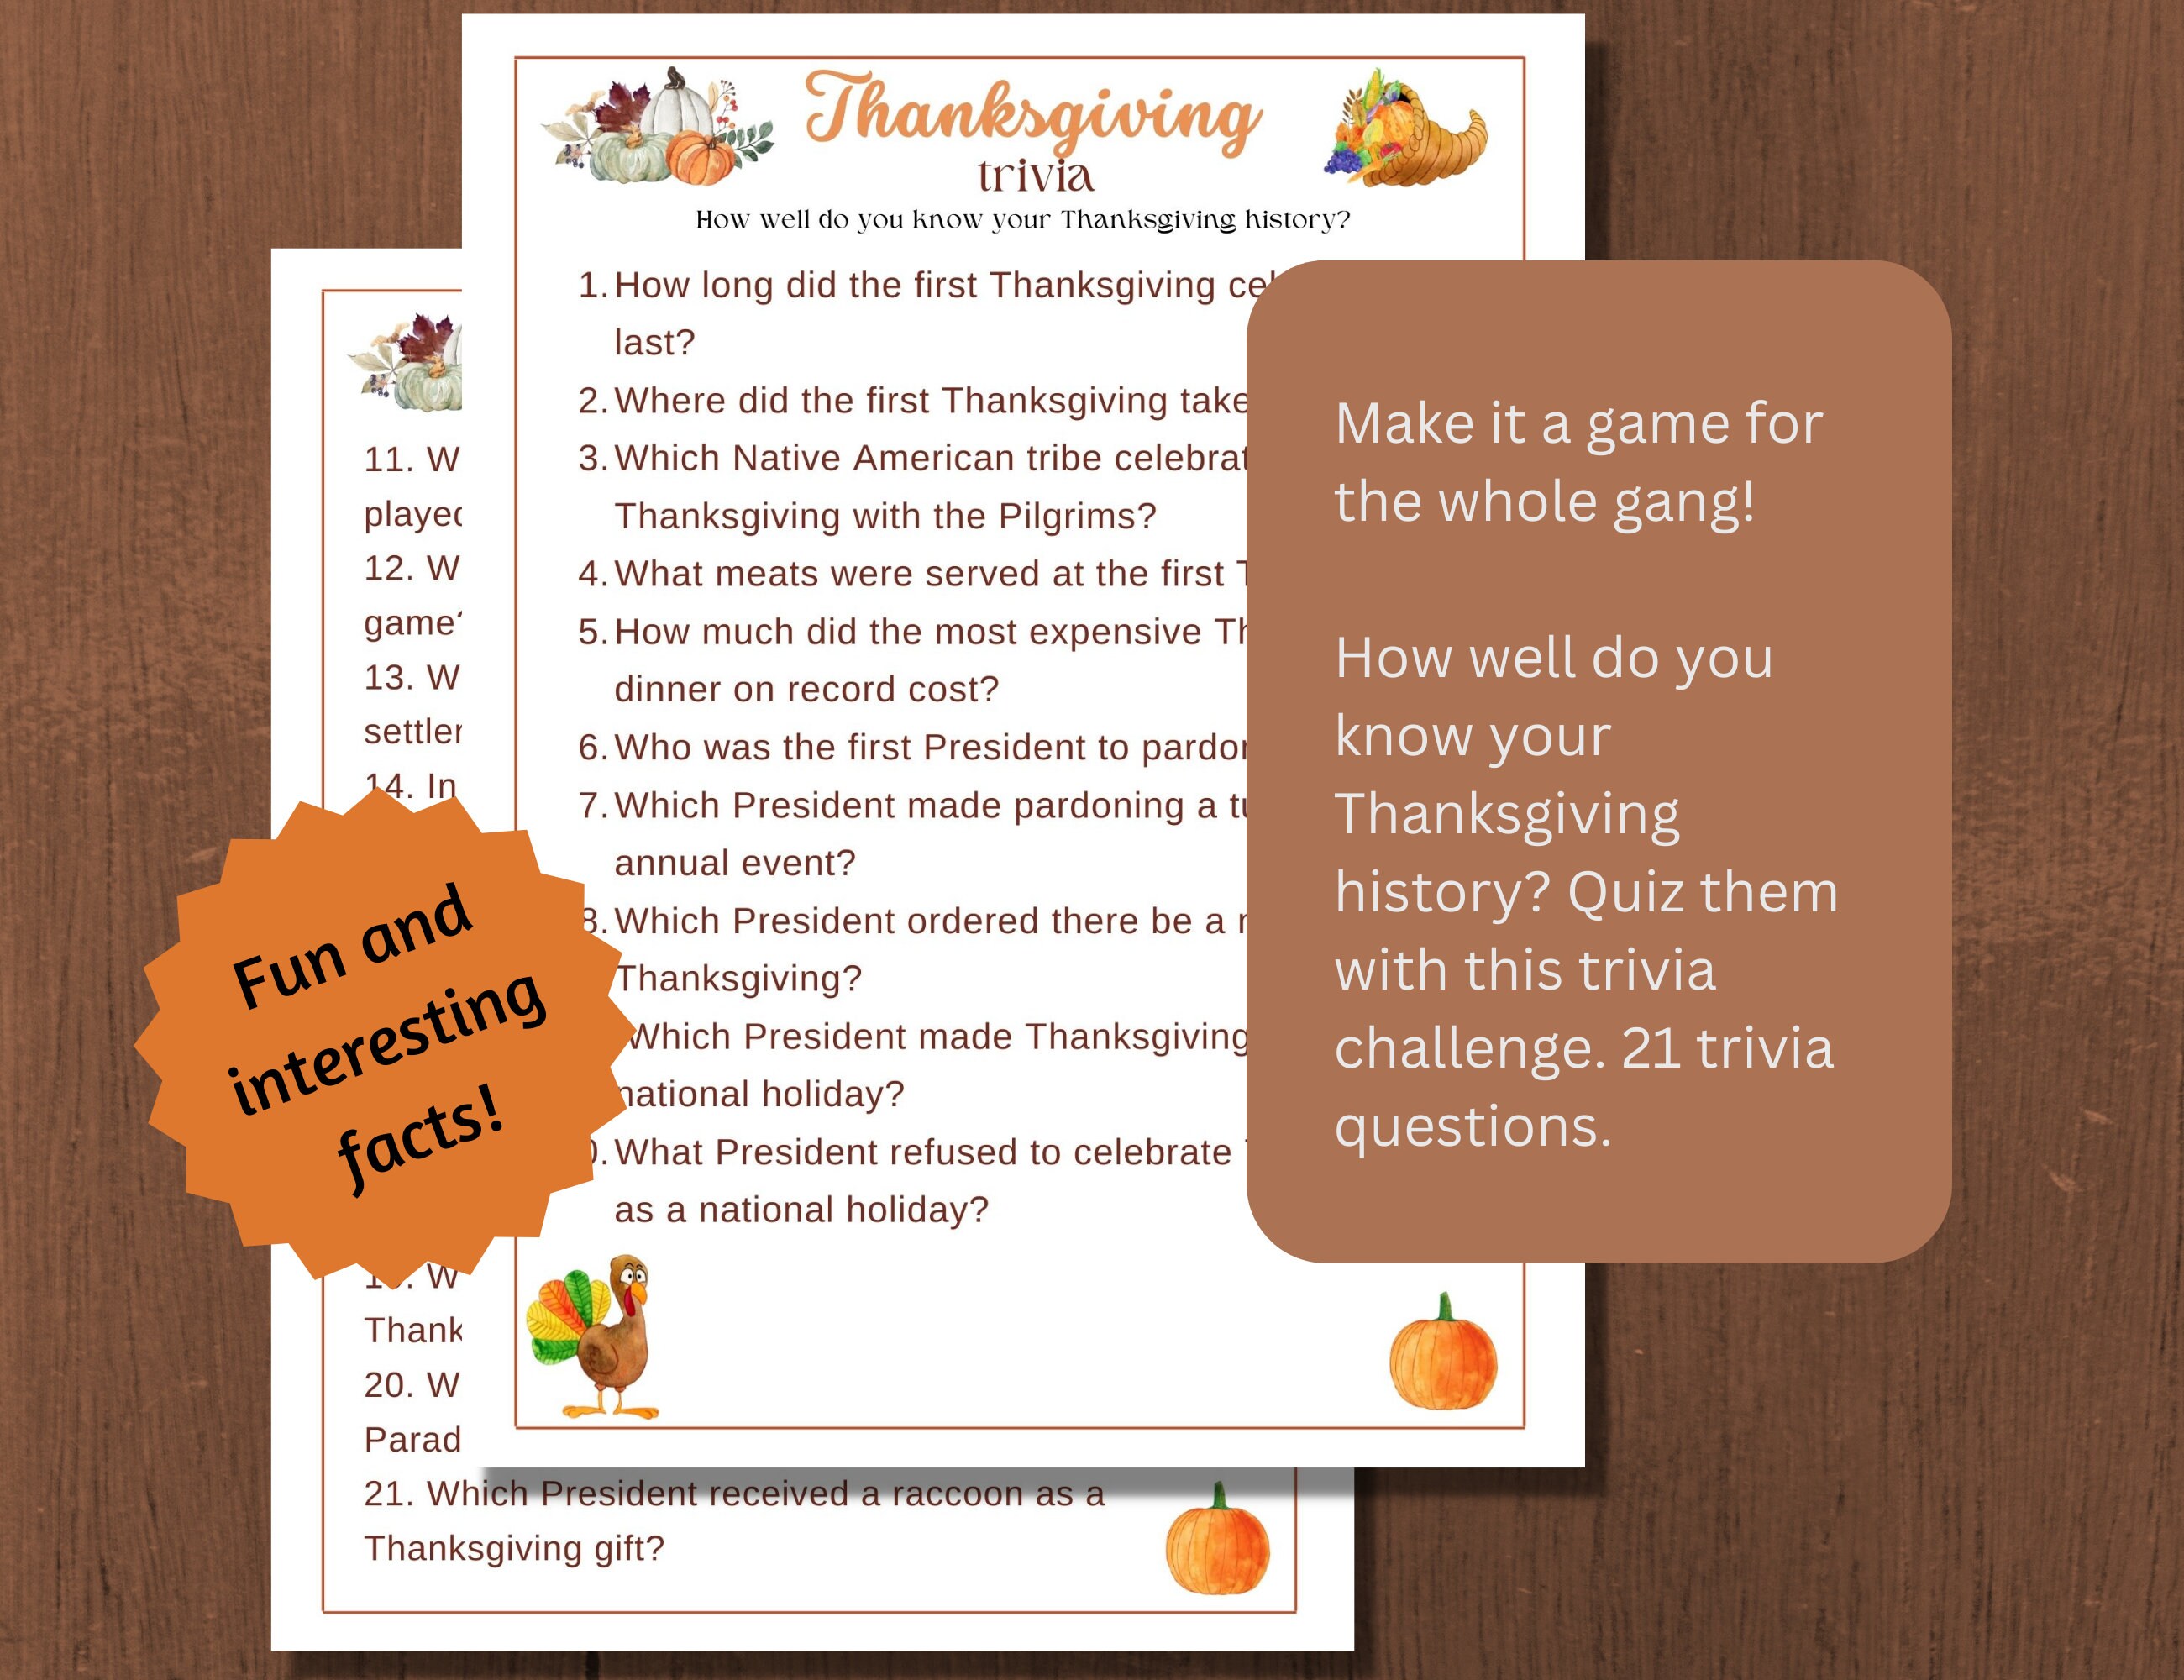 Thanksgiving History Facts and Trivia